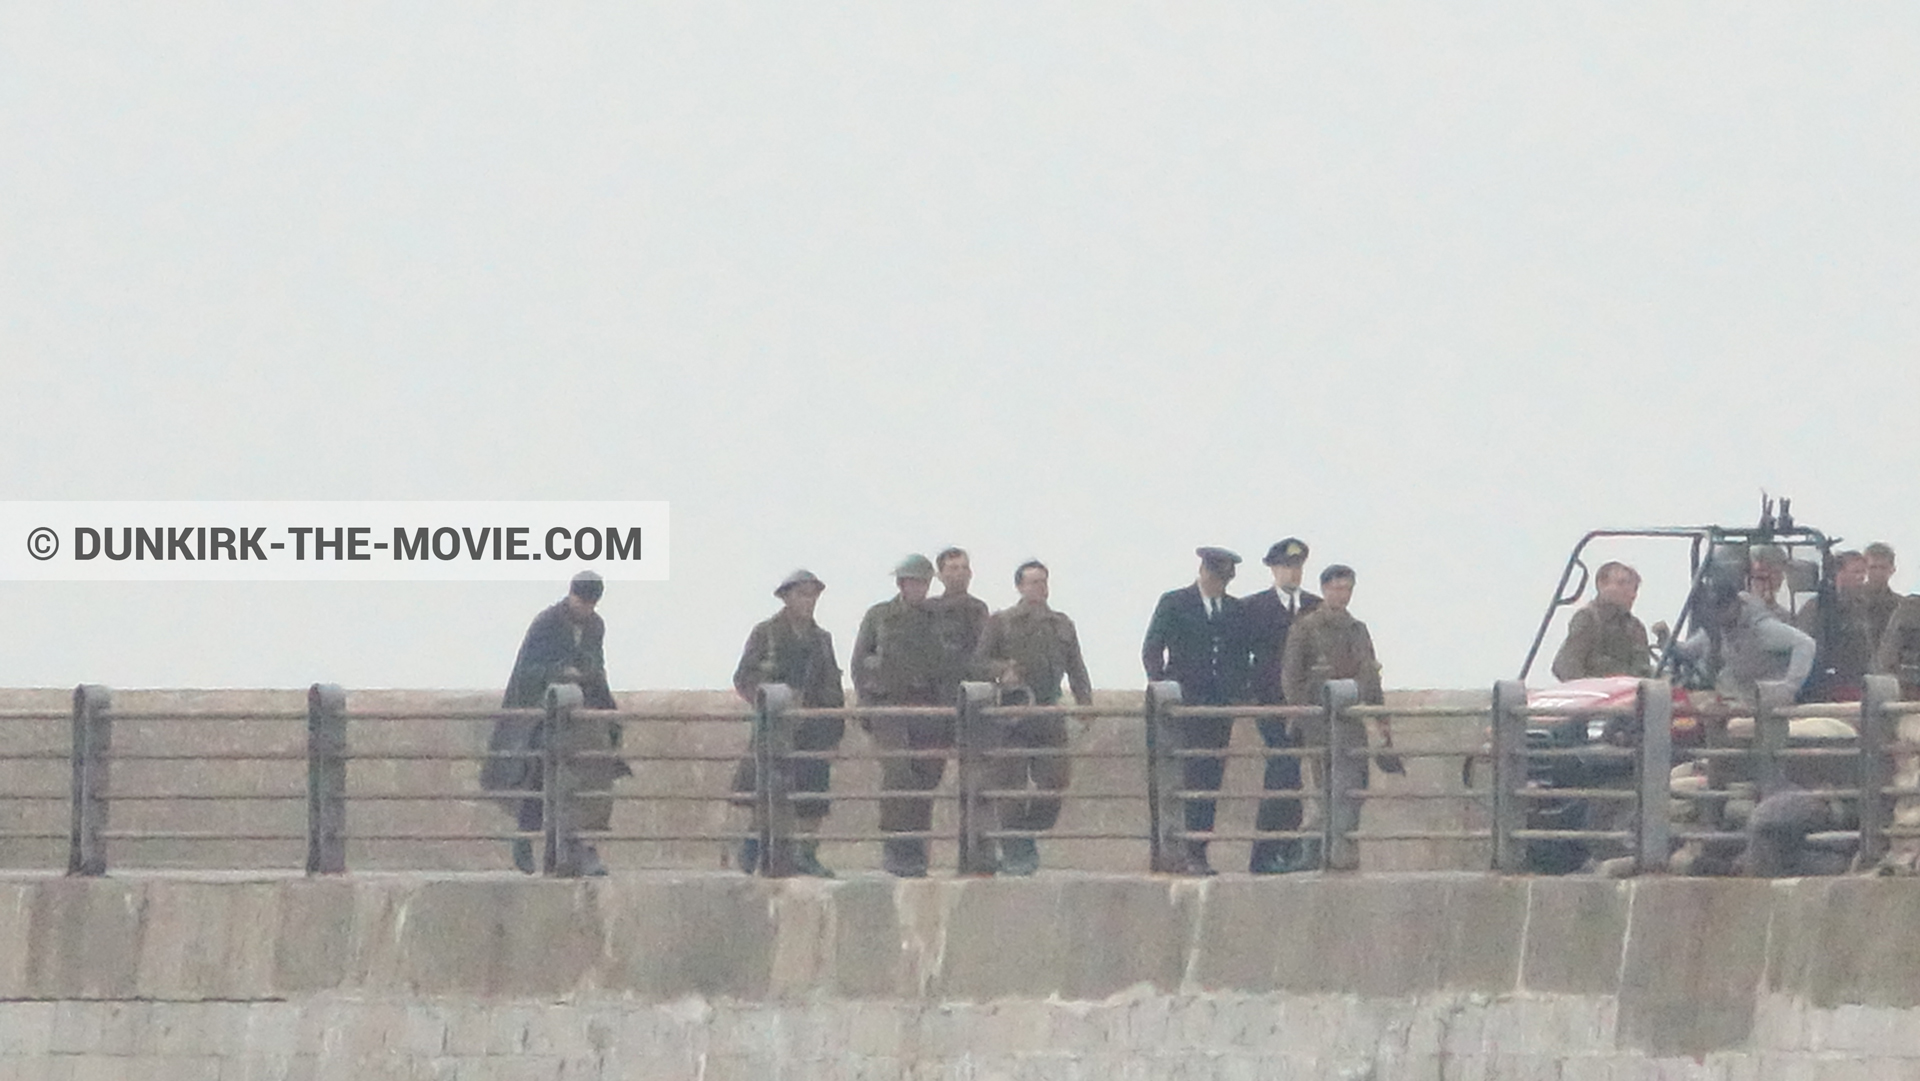 Picture with actor, grey sky, supernumeraries, EST pier, Kenneth Branagh, technical team,  from behind the scene of the Dunkirk movie by Nolan